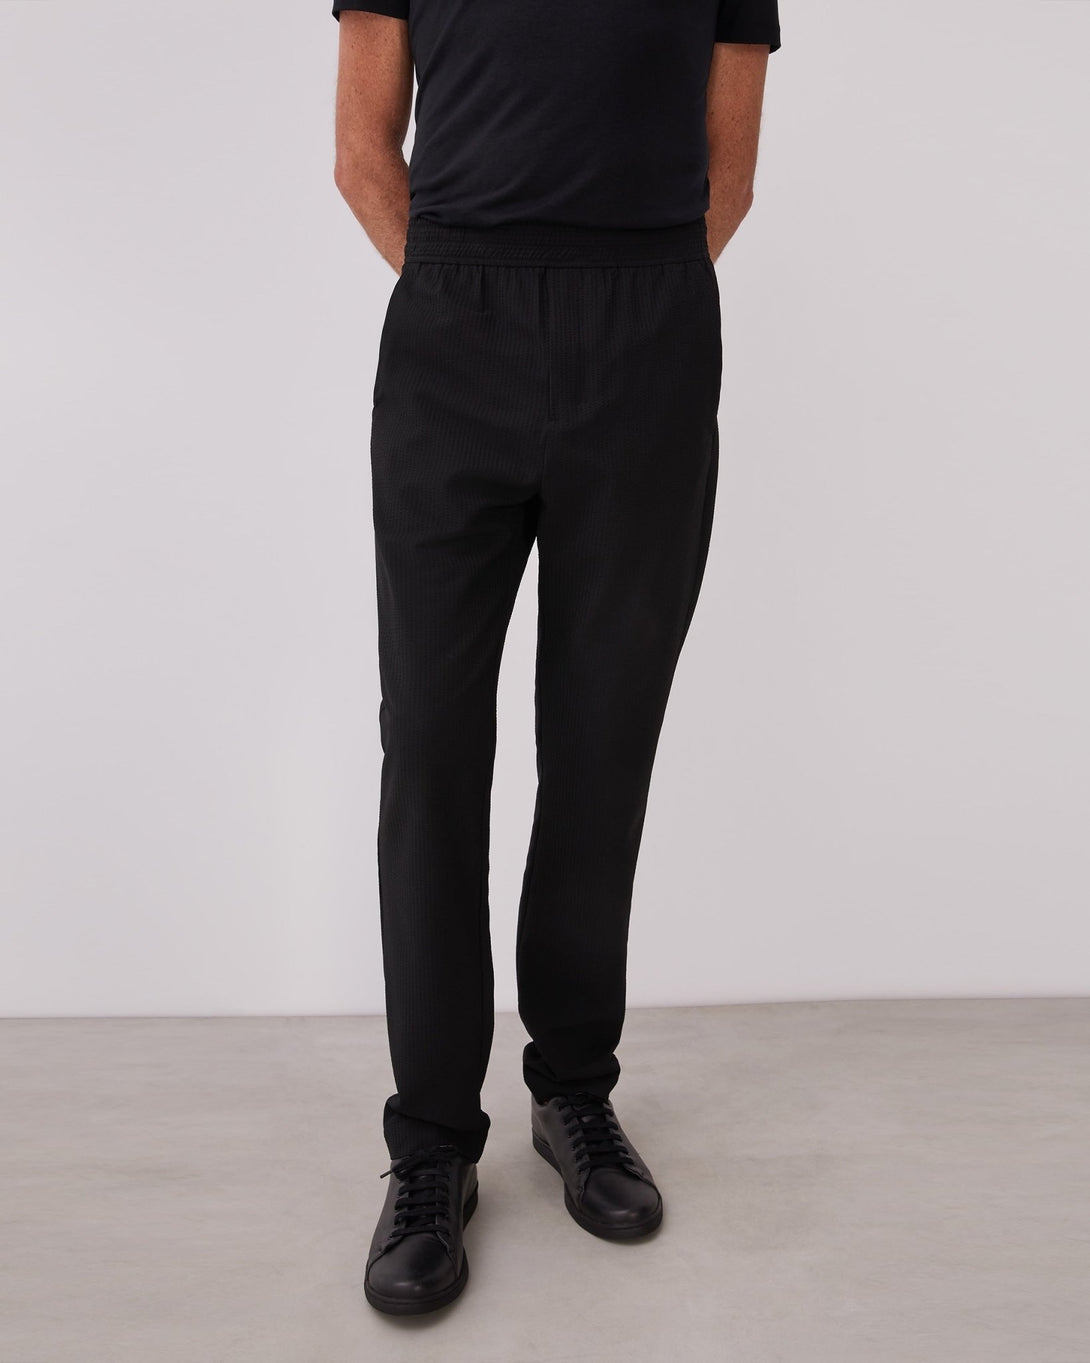 Men Trousers | Black Trousers With Elastic Waist And No Darts by Spanish designer Adolfo Dominguez